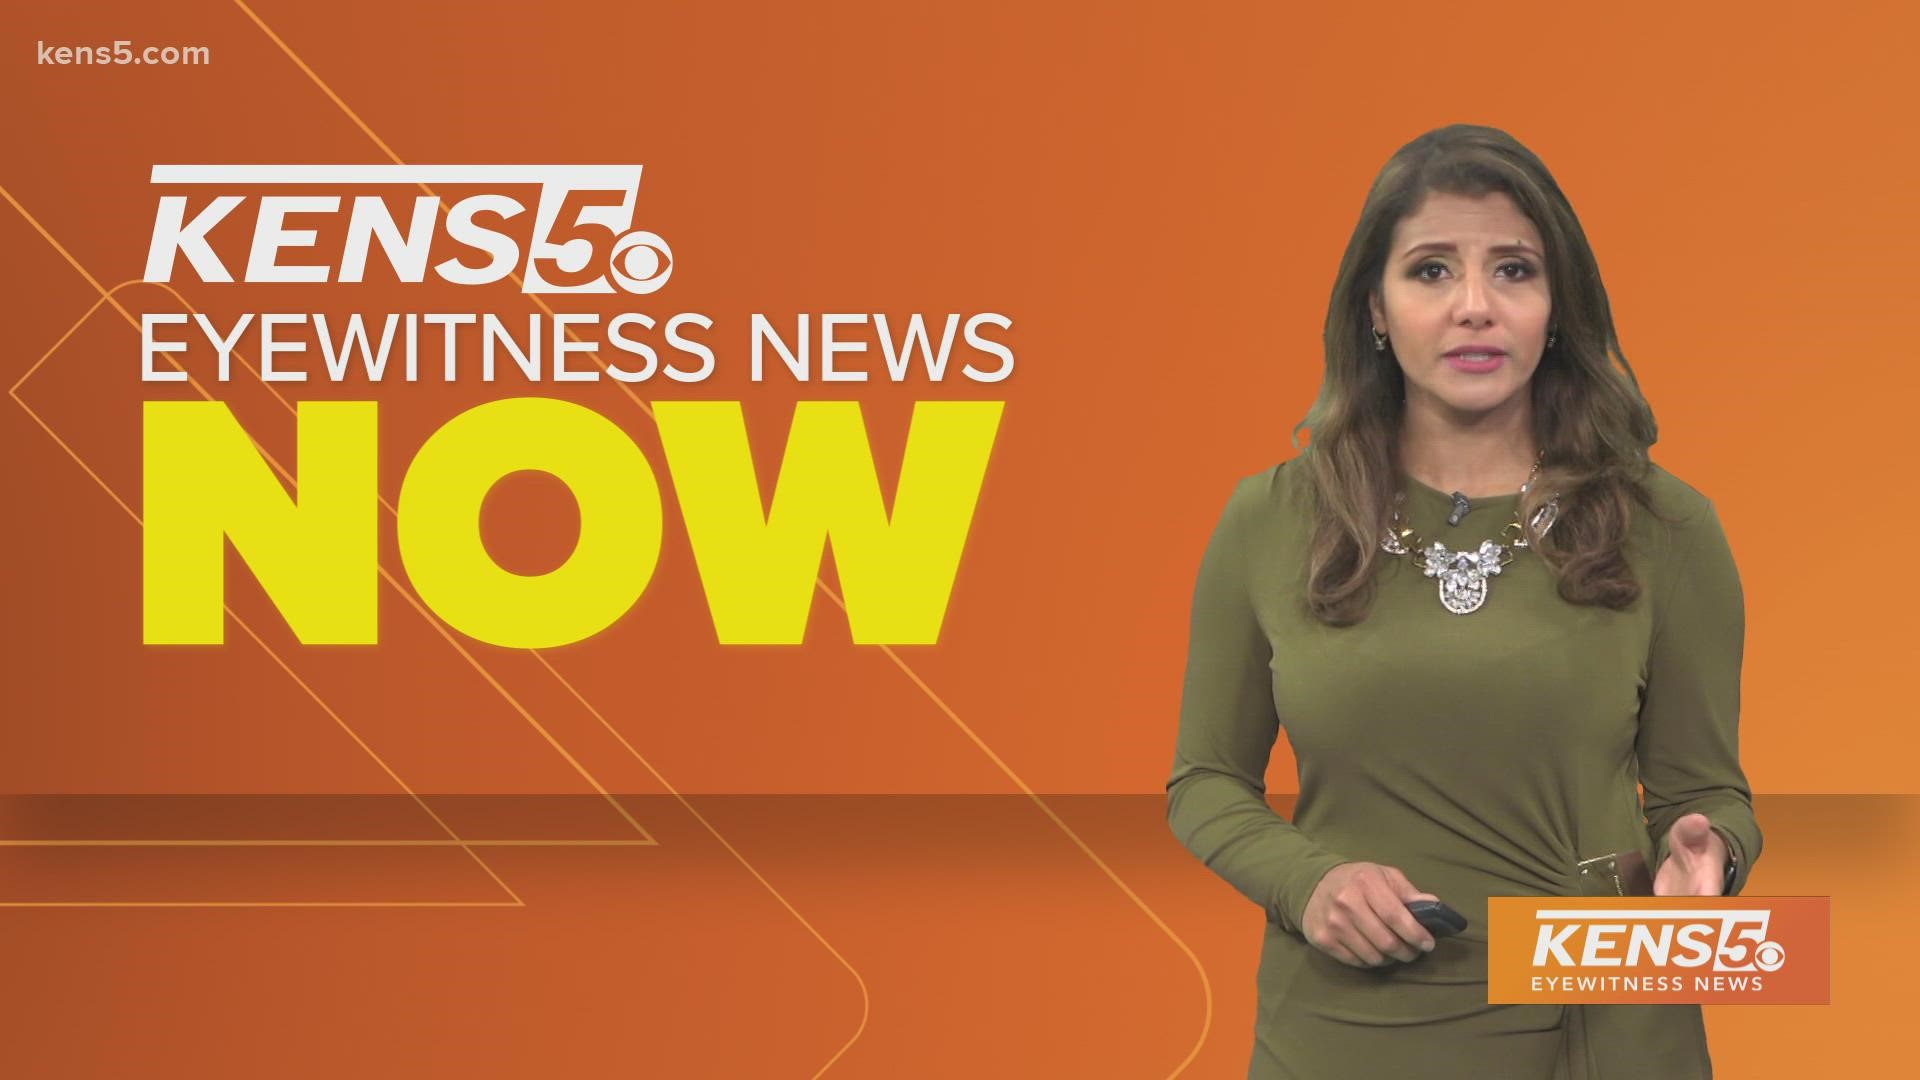 Follow us here to get the latest with the KENS 5 morning team every weekday.